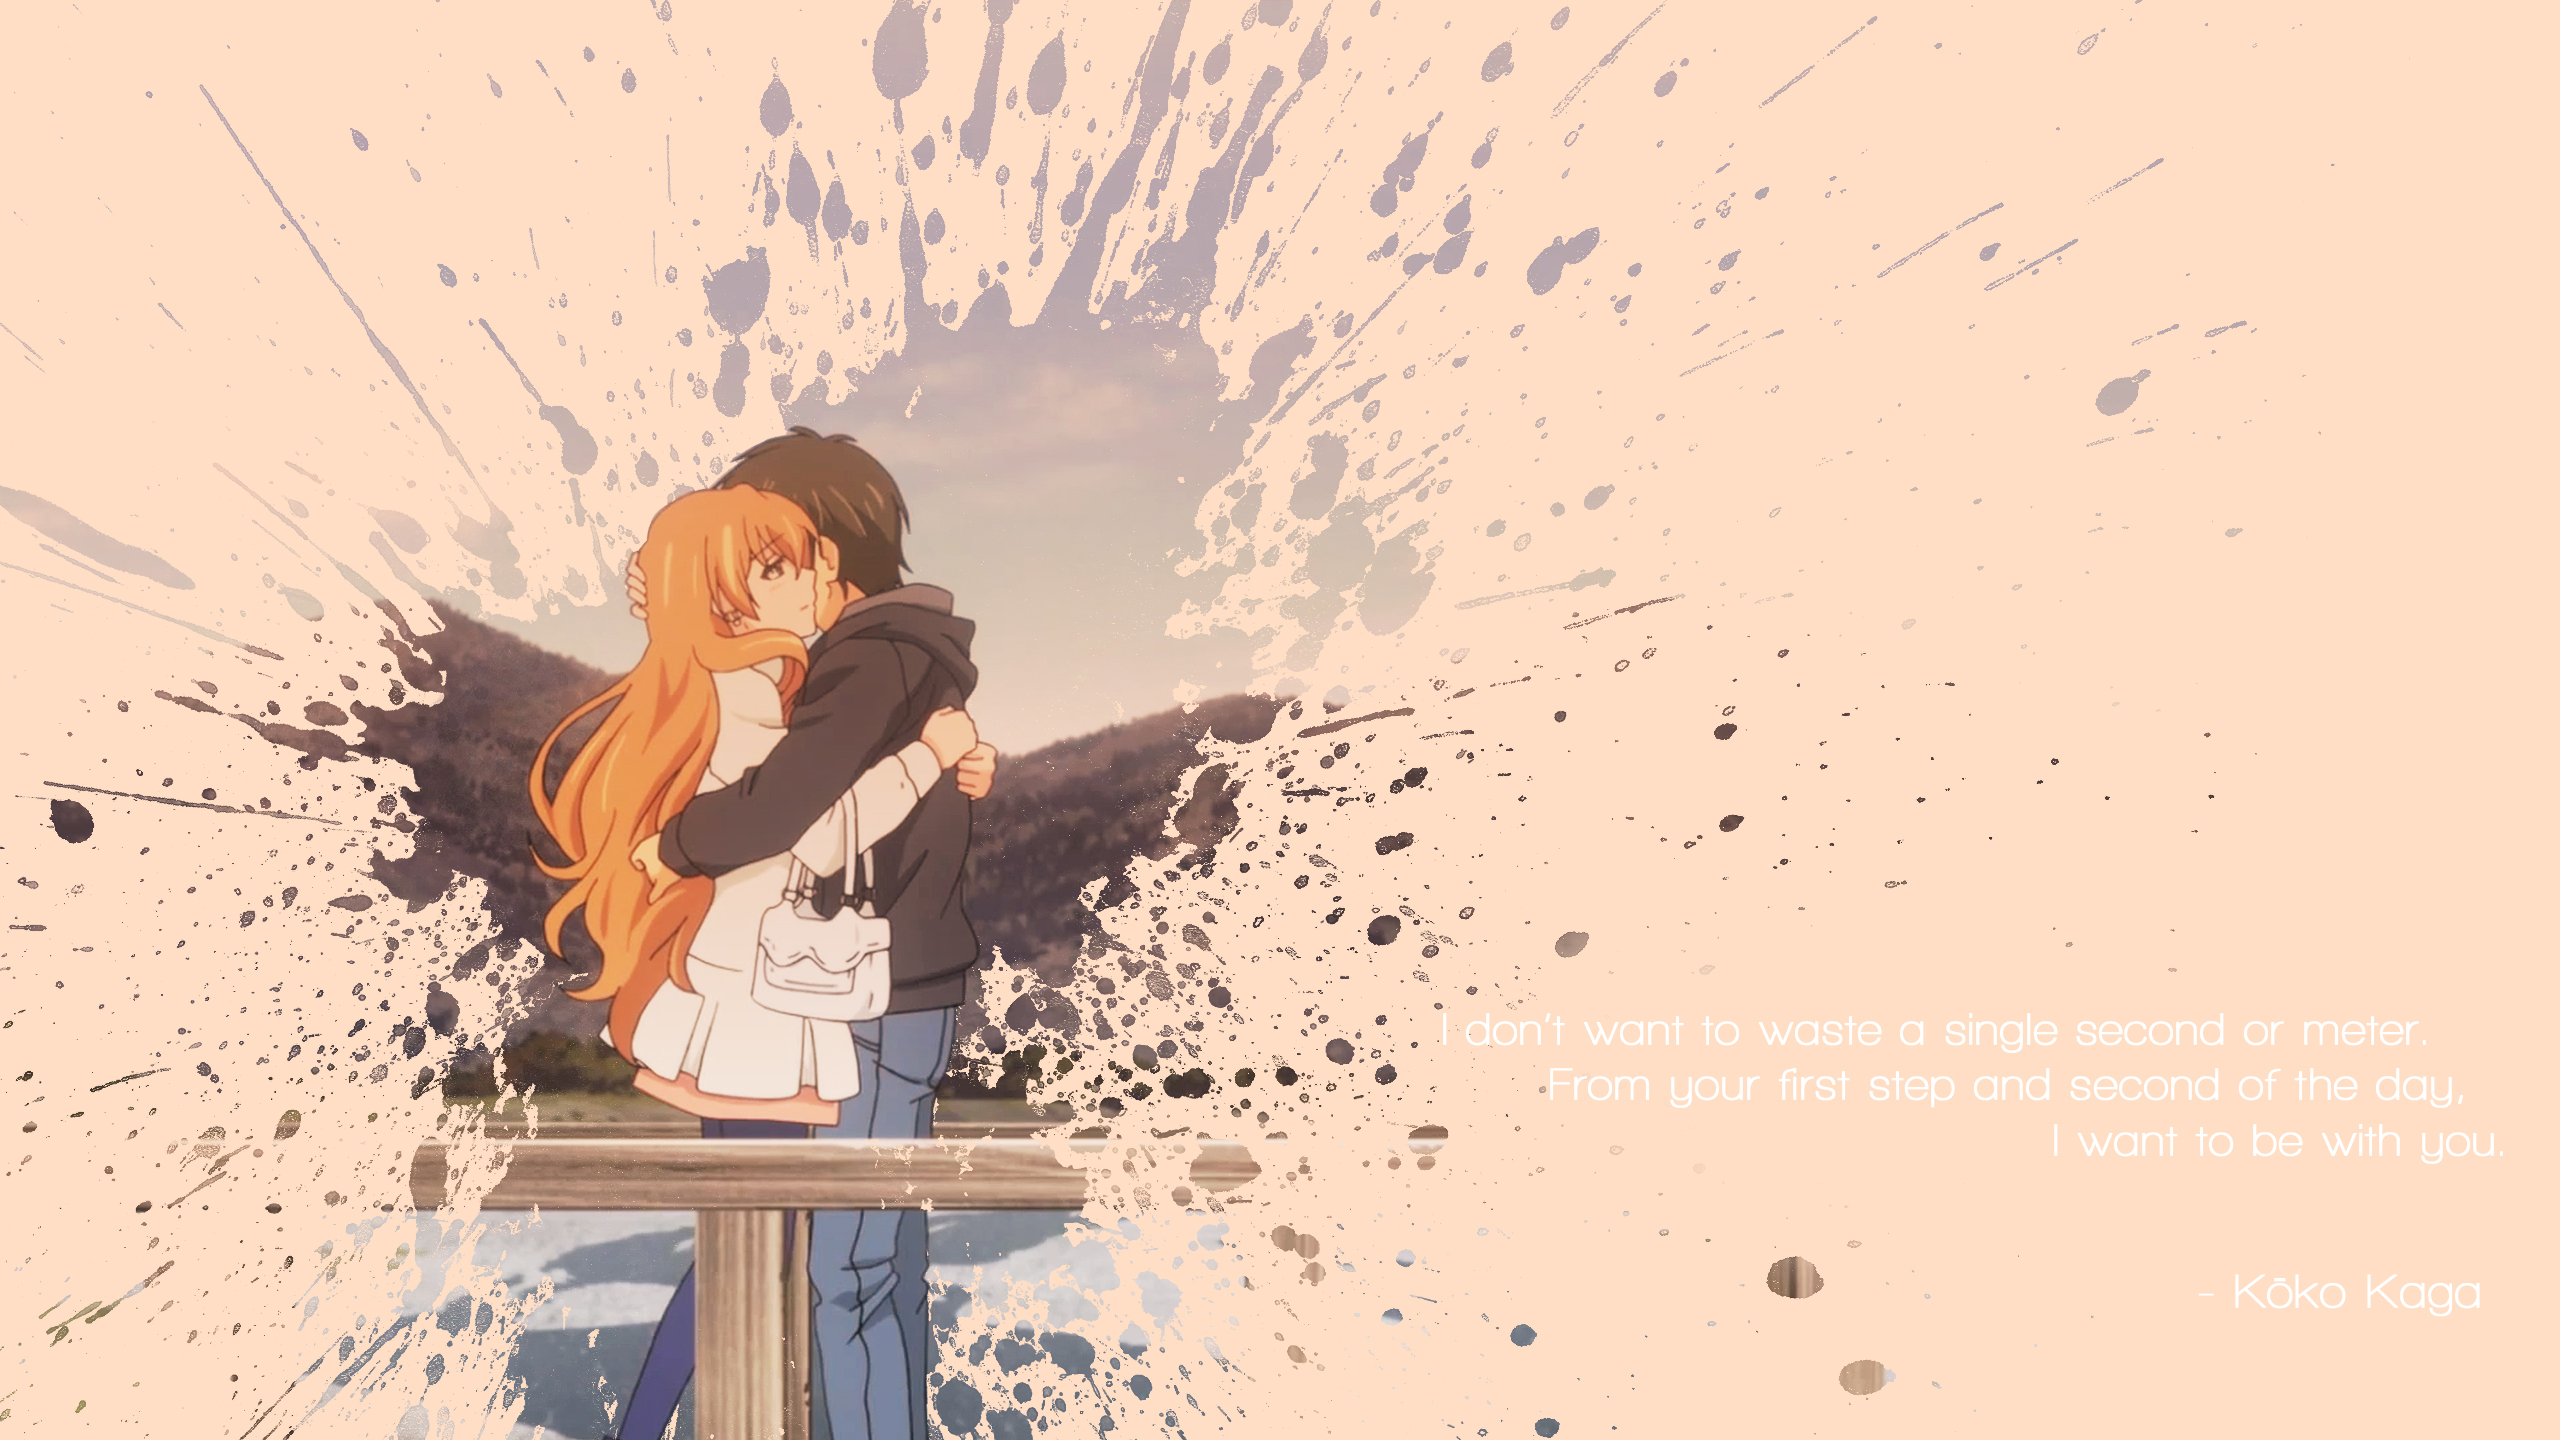 Golden Time   I Want to Be With You Wallpaper by 2560x1440